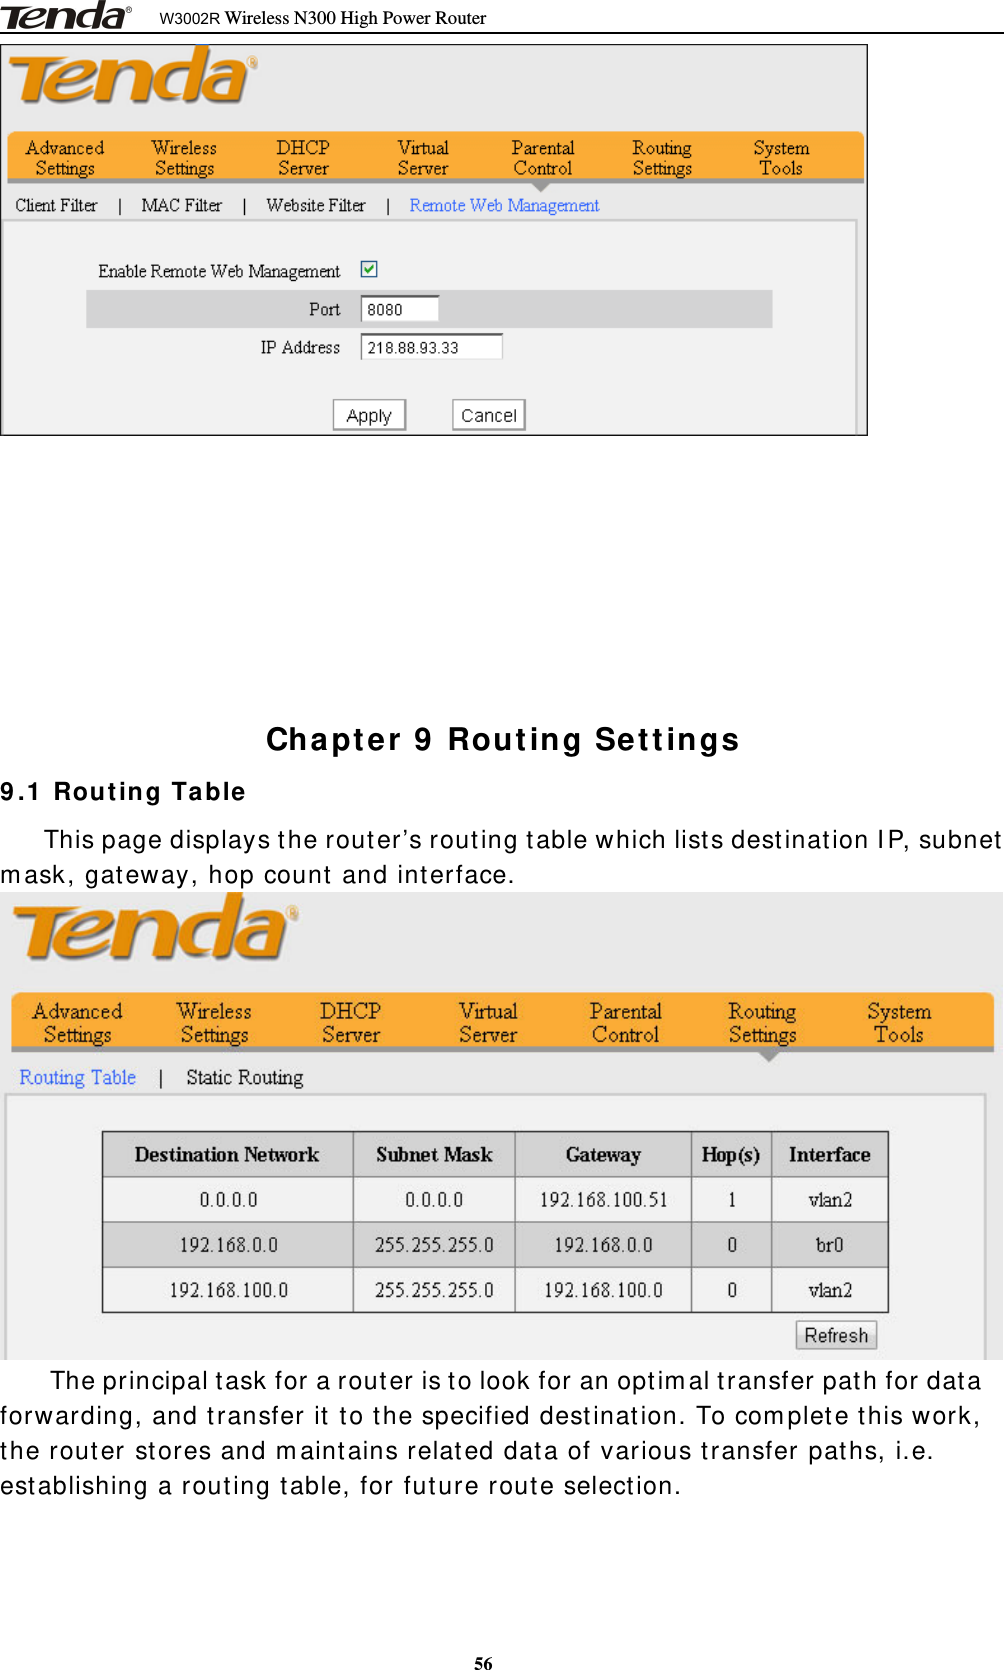 W3002R Wireless N300 High Power Router56Chapter 9 Routing Settings9.1 Routing TableThis page displays the router’s routing table which lists destination IP, subnetmask, gateway, hop count and interface.The principal task for a router is to look for an optimal transfer path for dataforwarding, and transfer it to the specified destination. To complete this work,the router stores and maintains related data of various transfer paths, i.e.establishing a routing table, for future route selection.